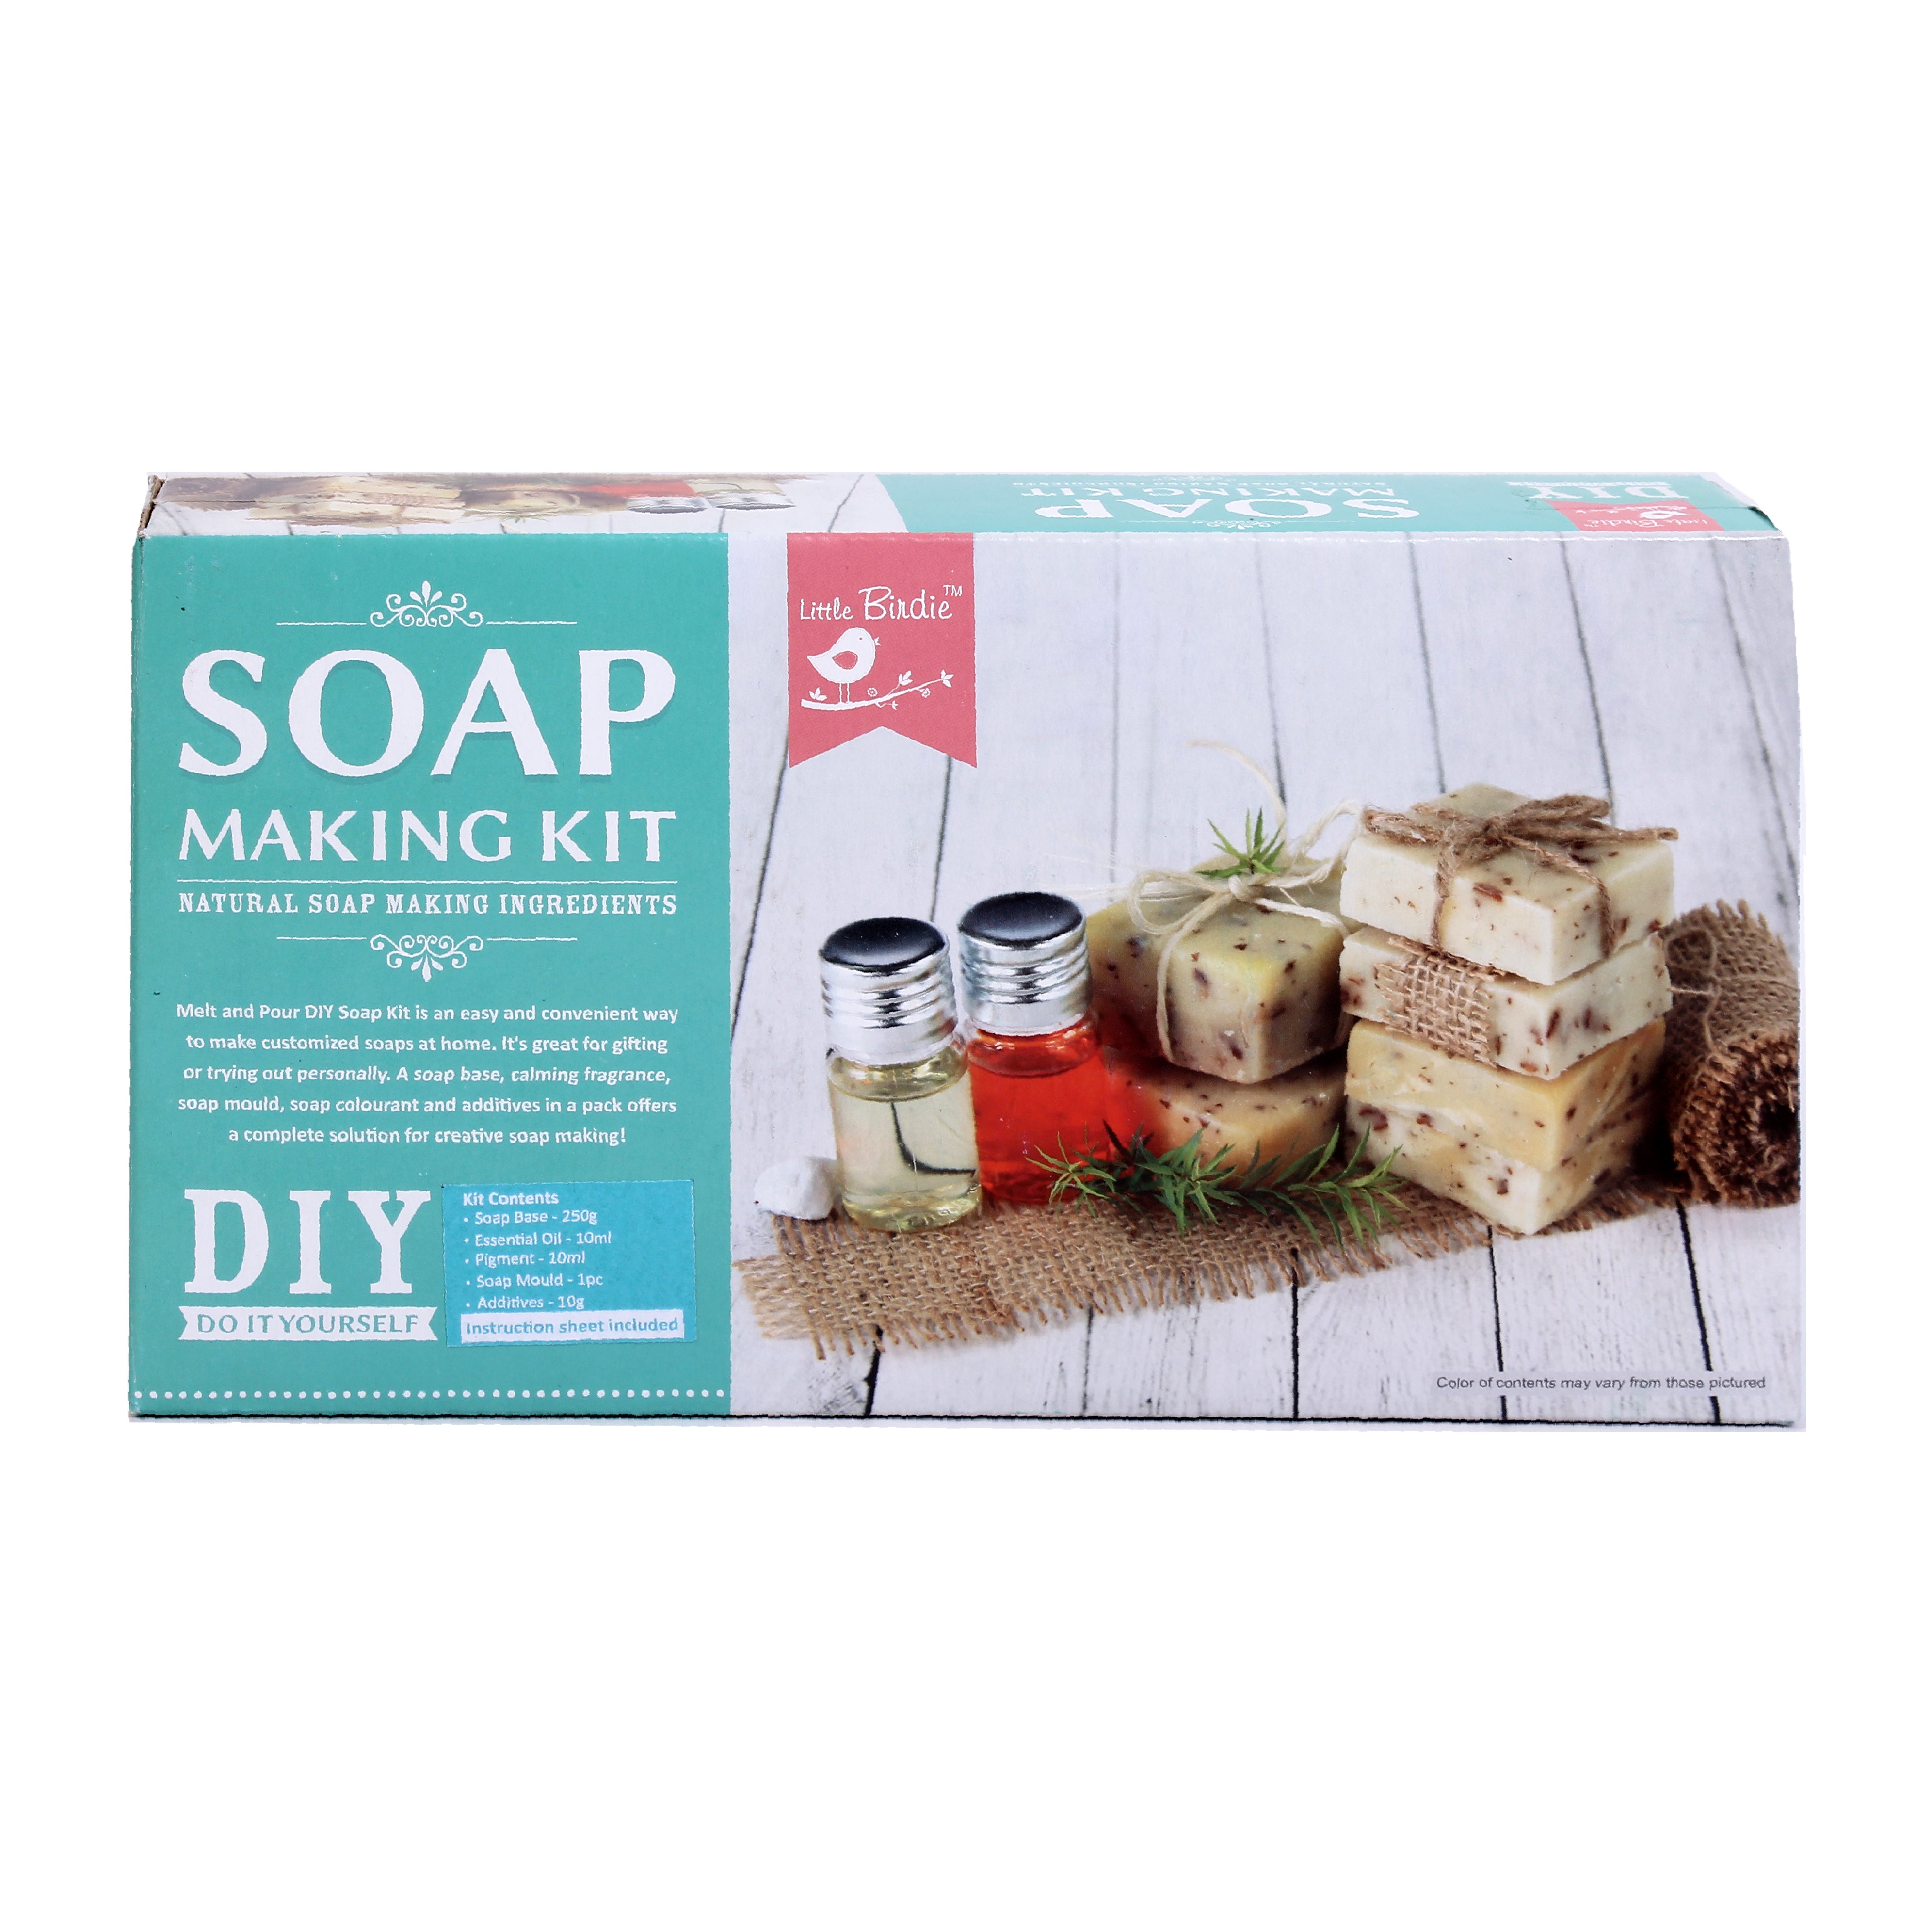 Soap Making Kit with All Soap Making Supplies| DIY Melt and Pour Soap Kit  Great Soap Making kit for Adults and Kids| Homemade Soap